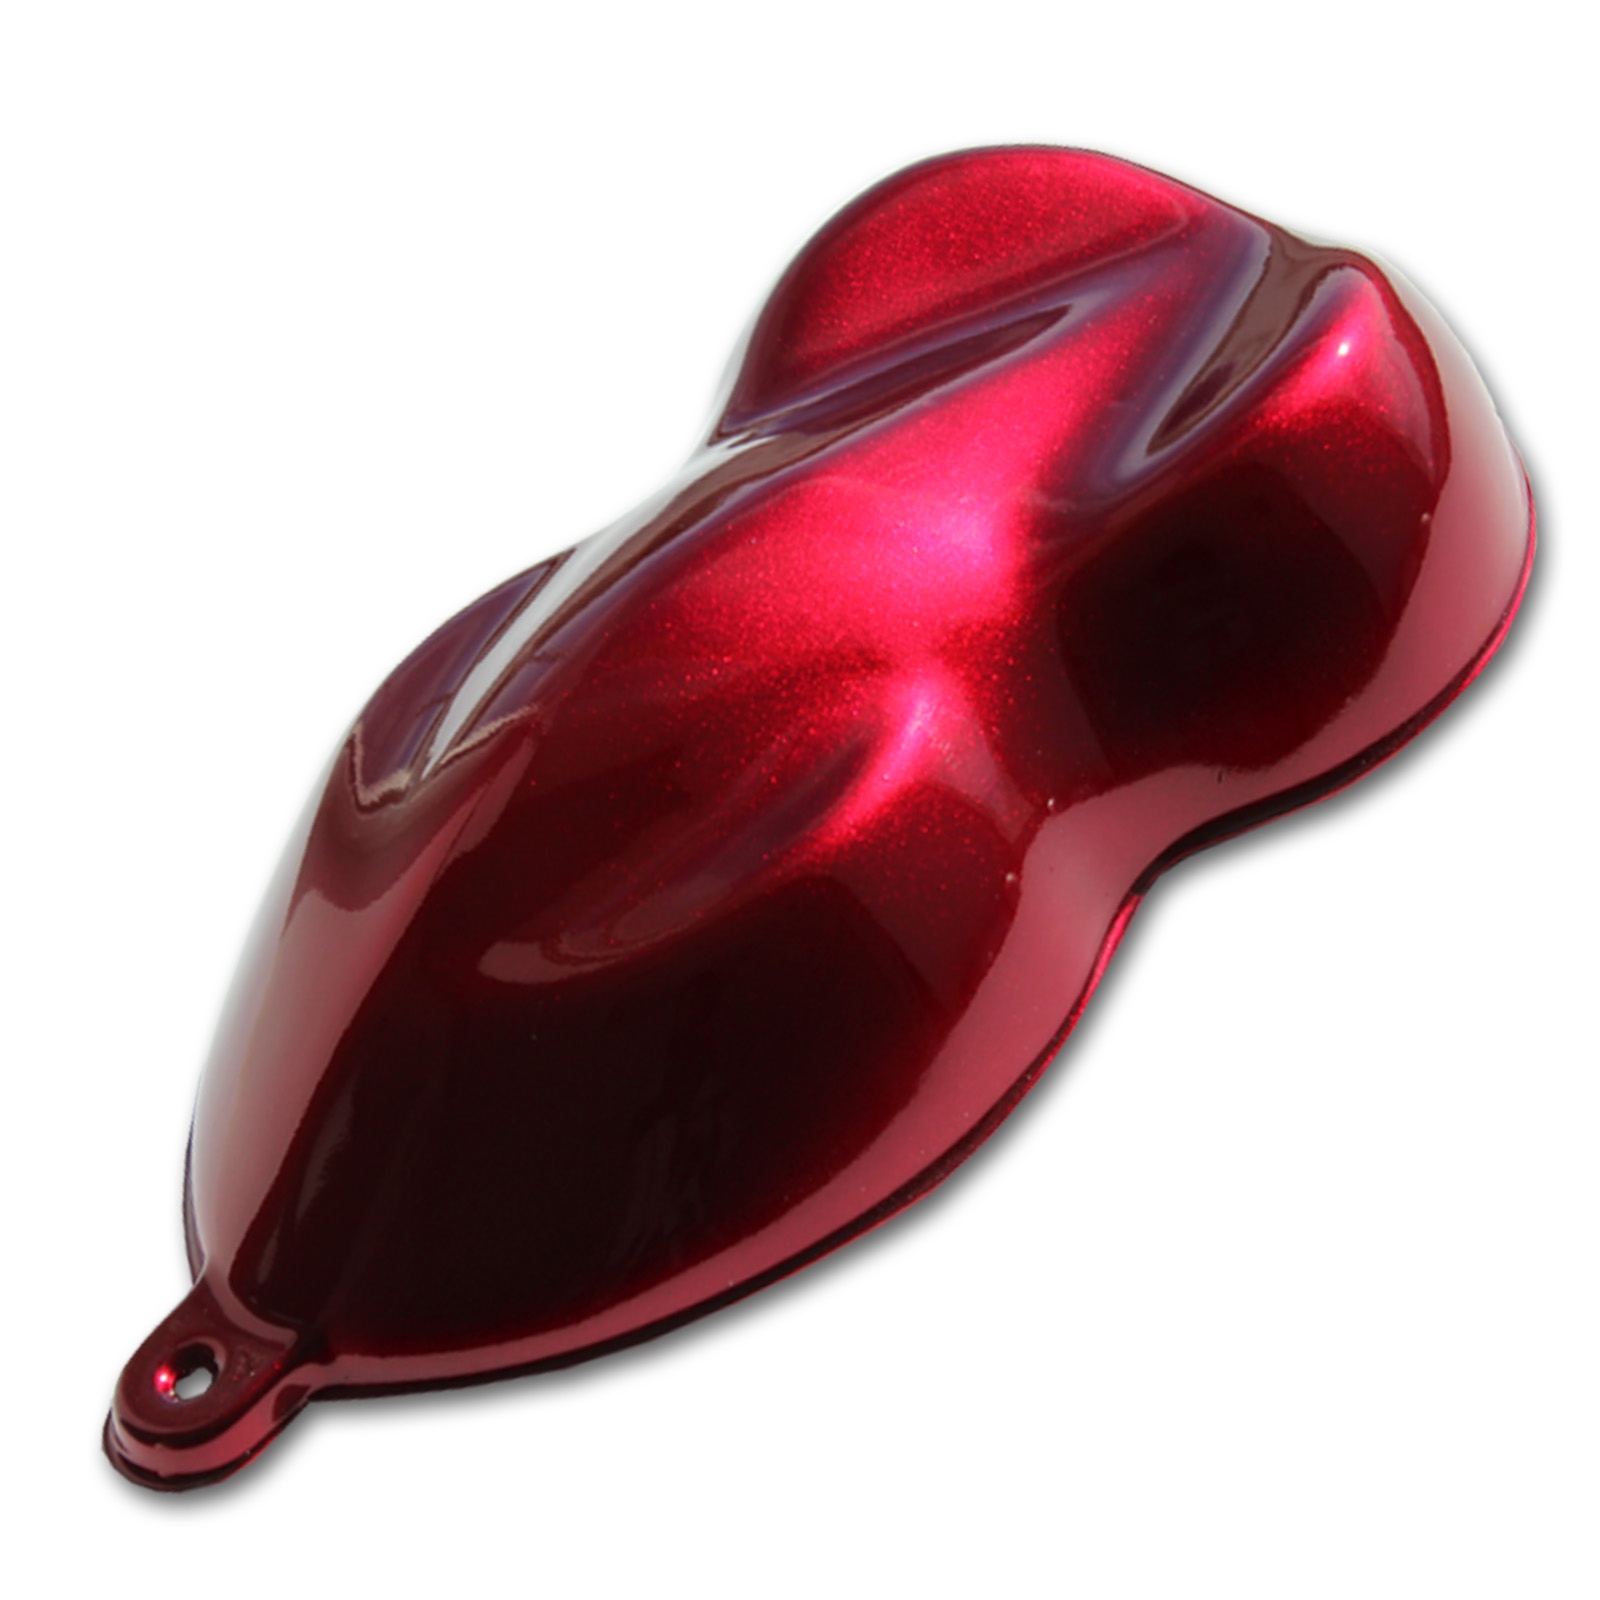 Wine Red 2K Urethane Candy Paint Kit 